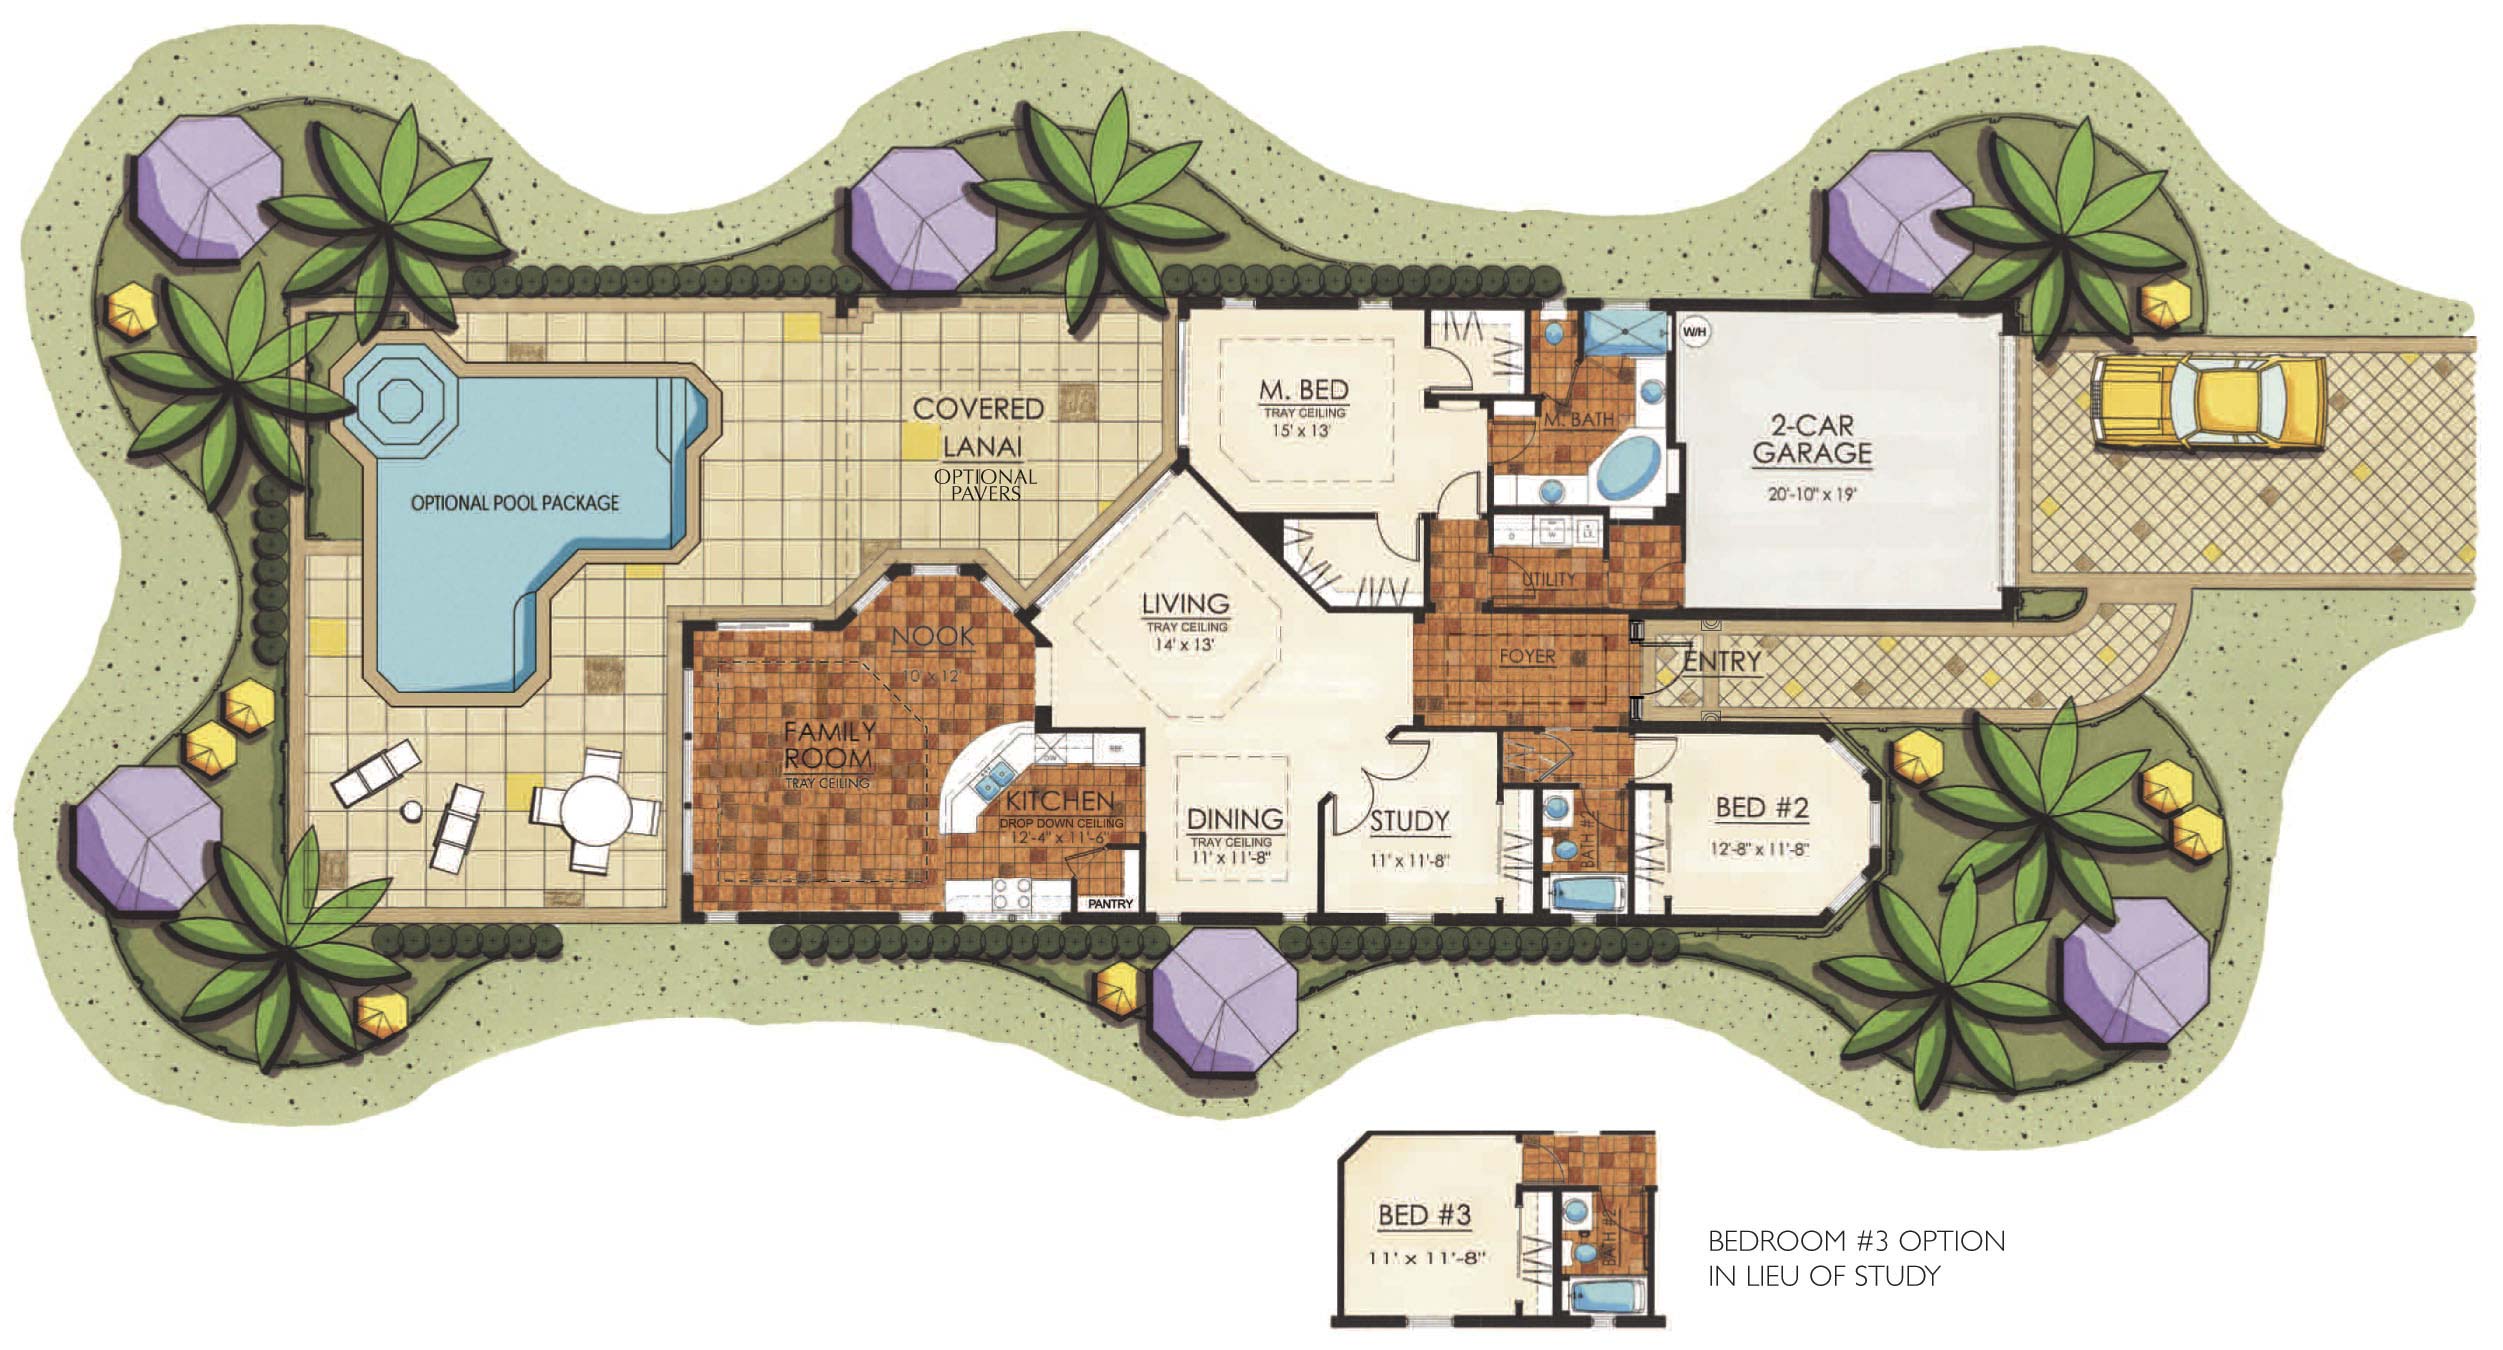 Florence II Floor Plan in Paseo, 2 bedroom, 2 bath, family room, living room, dining room, study, screened covered lanai, 2-car garage